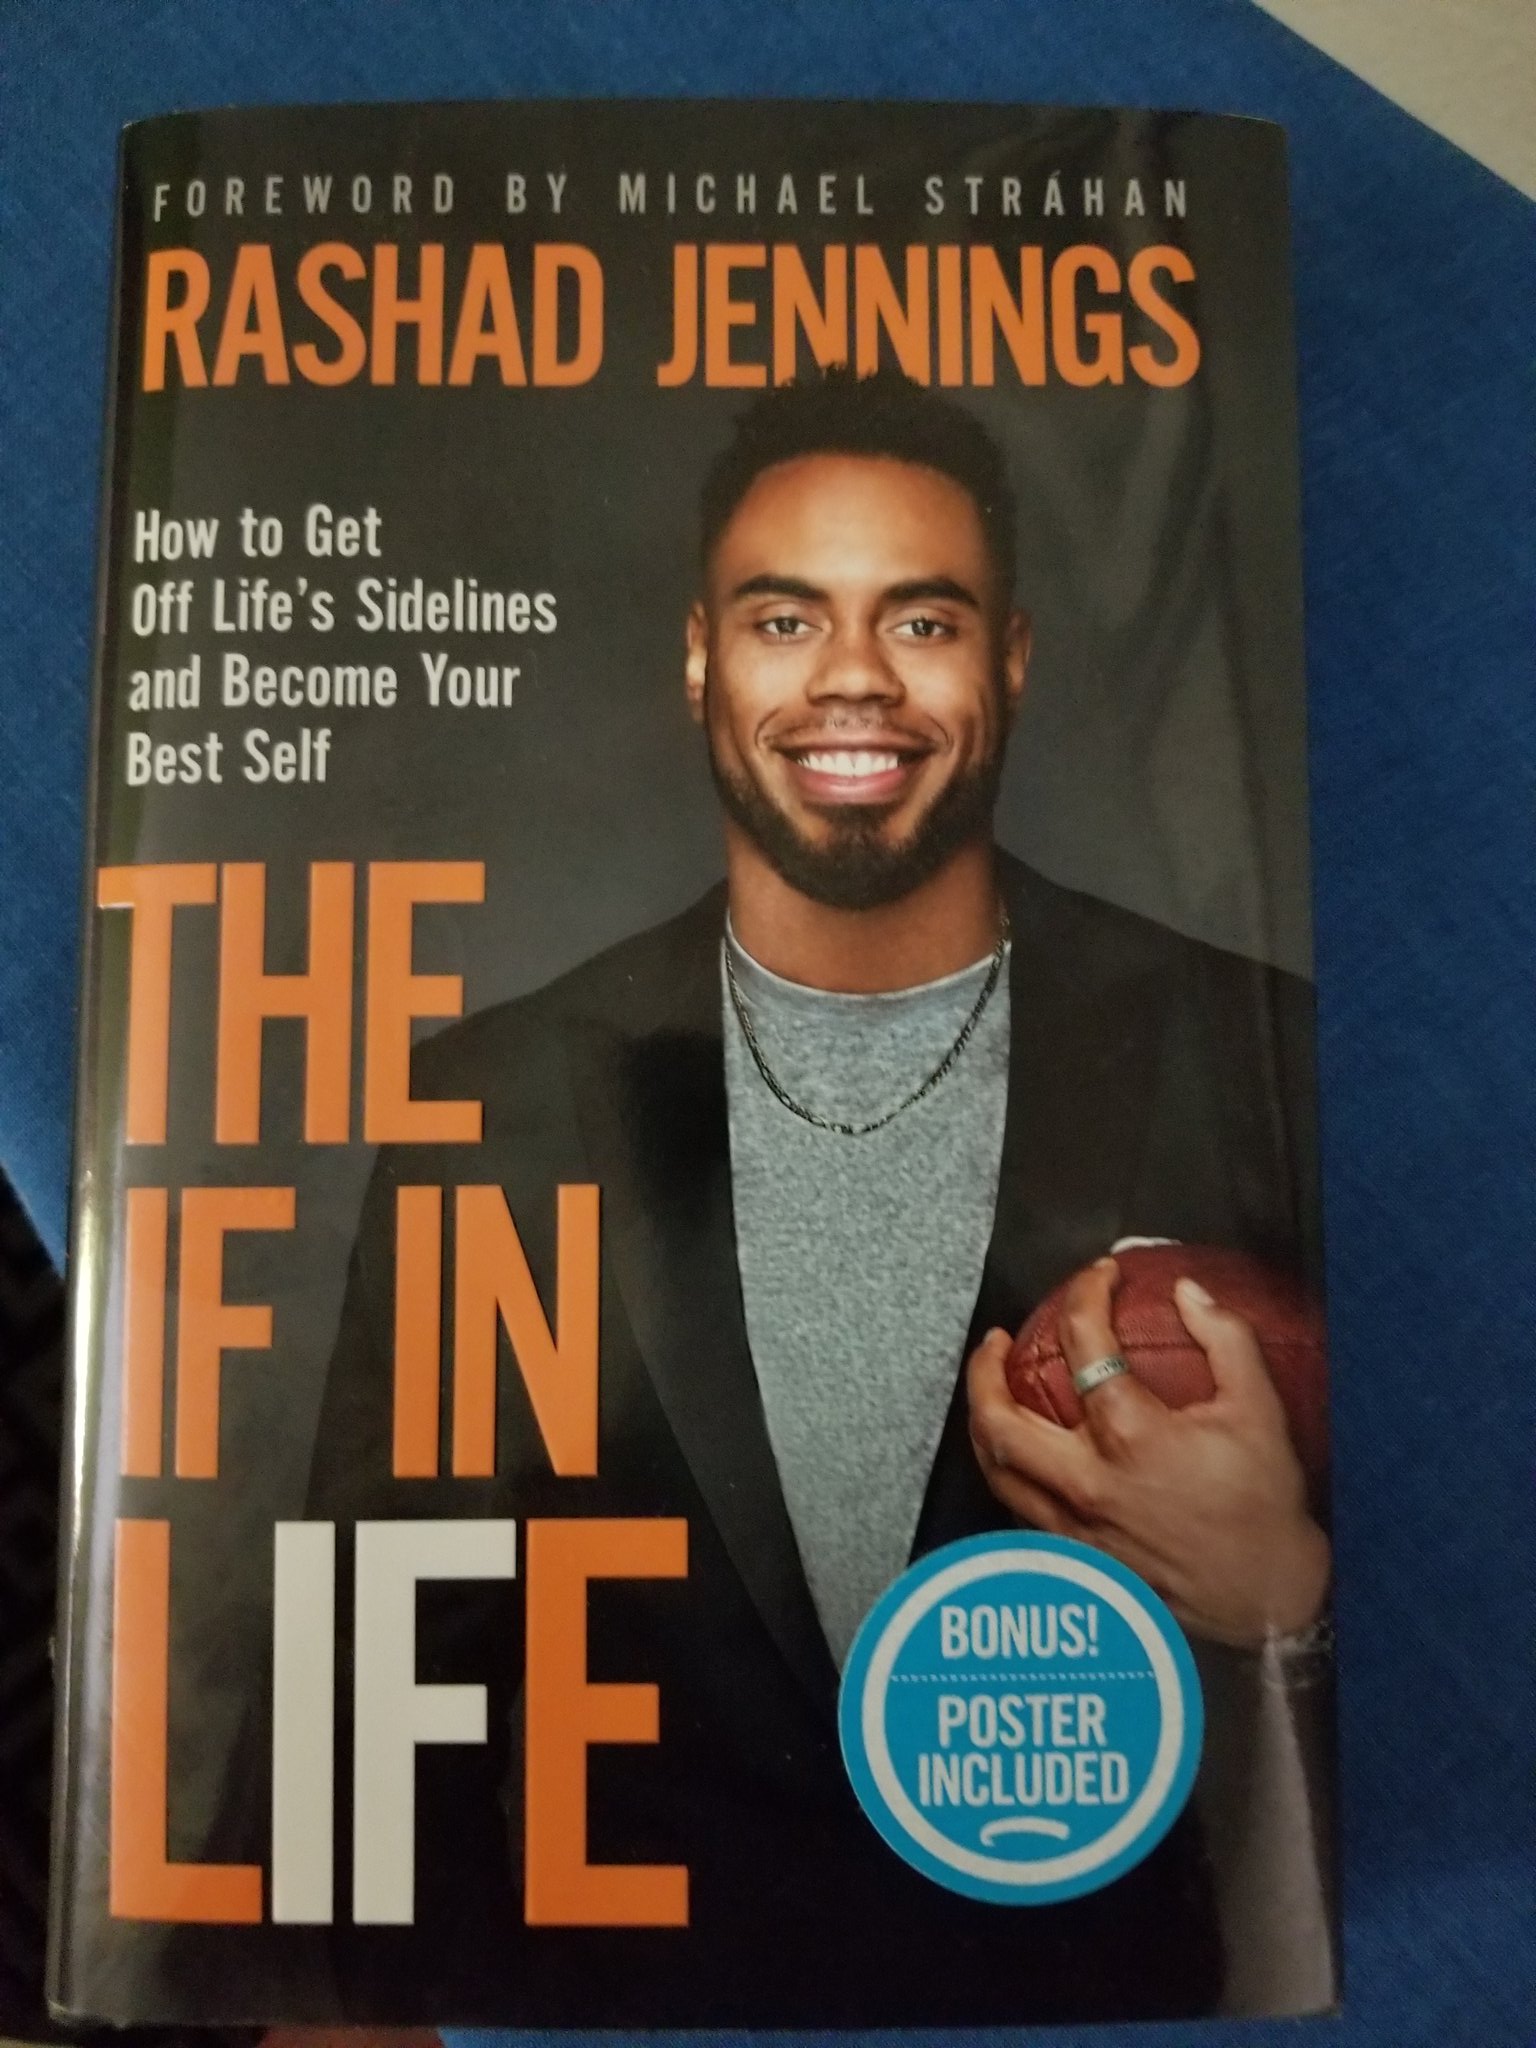 Cheryl Dotson On Twitter Rashadjennings Round 2 There Are Very Few Books I Re Read This Is